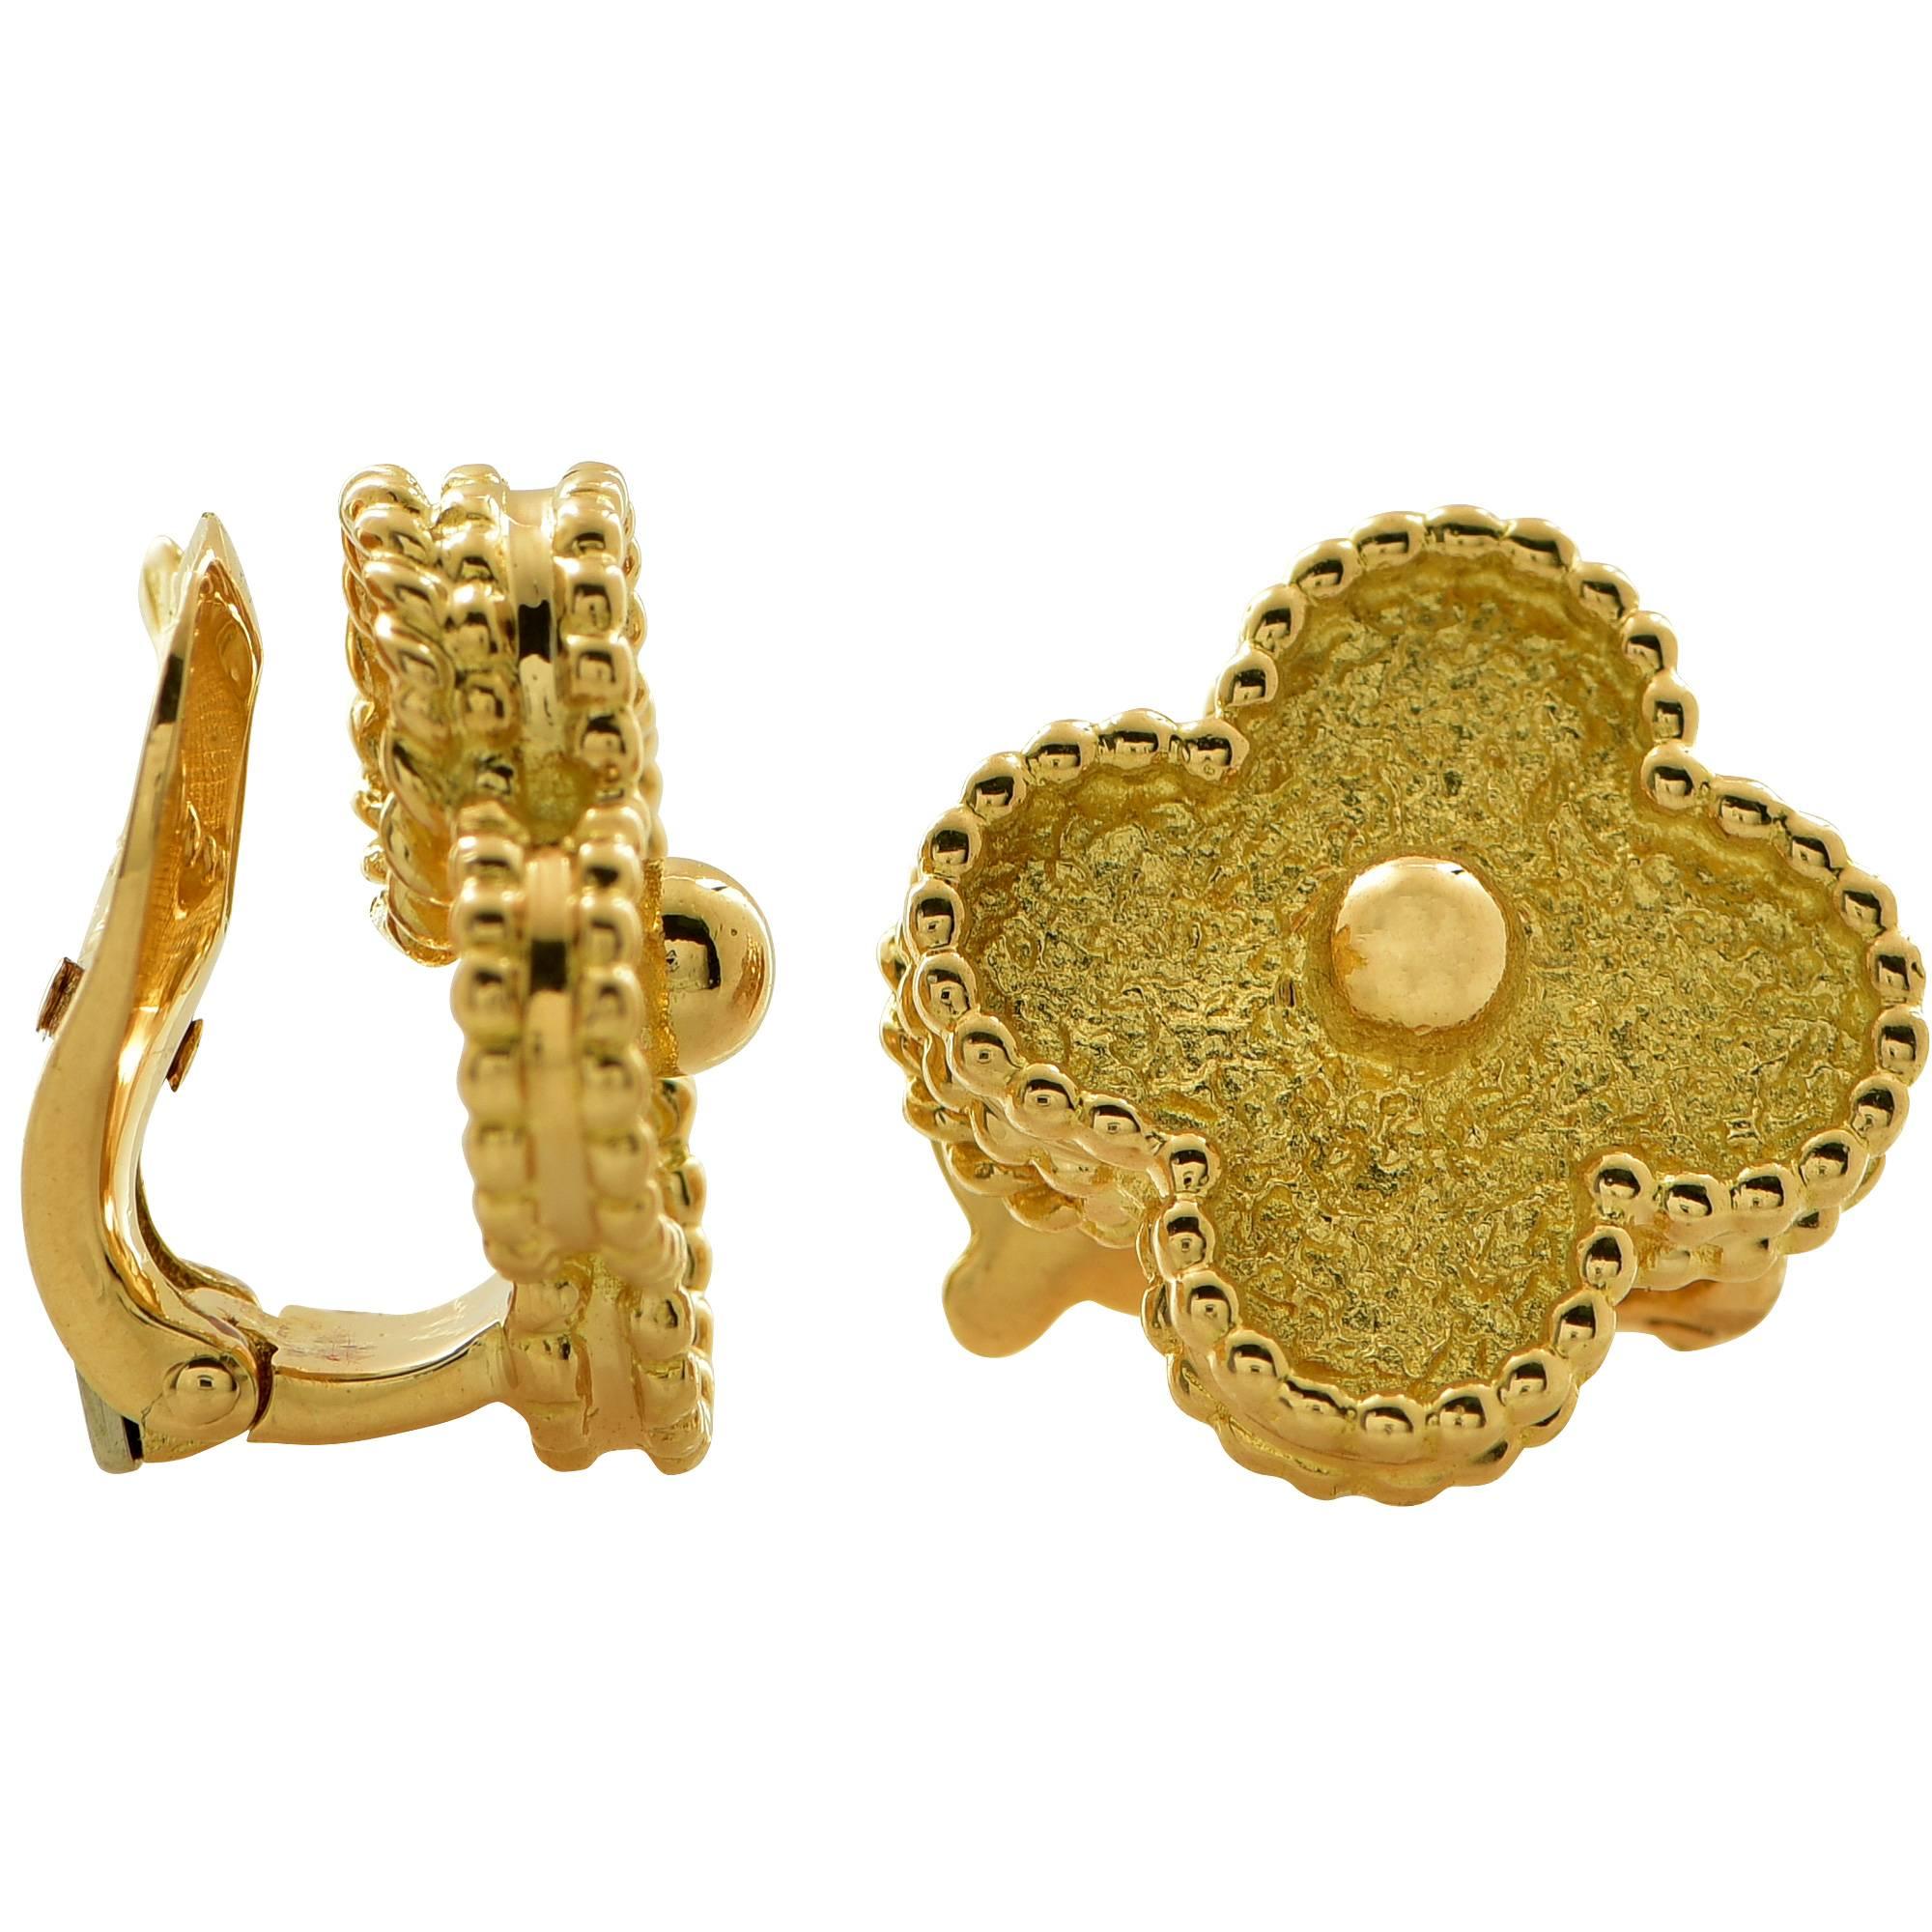 Vintage Alhambra earrings in 18k yellow gold.

It is stamped and/or tested as 18k gold.
The metal weight is 8.25 grams.

These VCA earrings are accompanied by a retail appraisal performed by a GIA Graduate Gemologist.